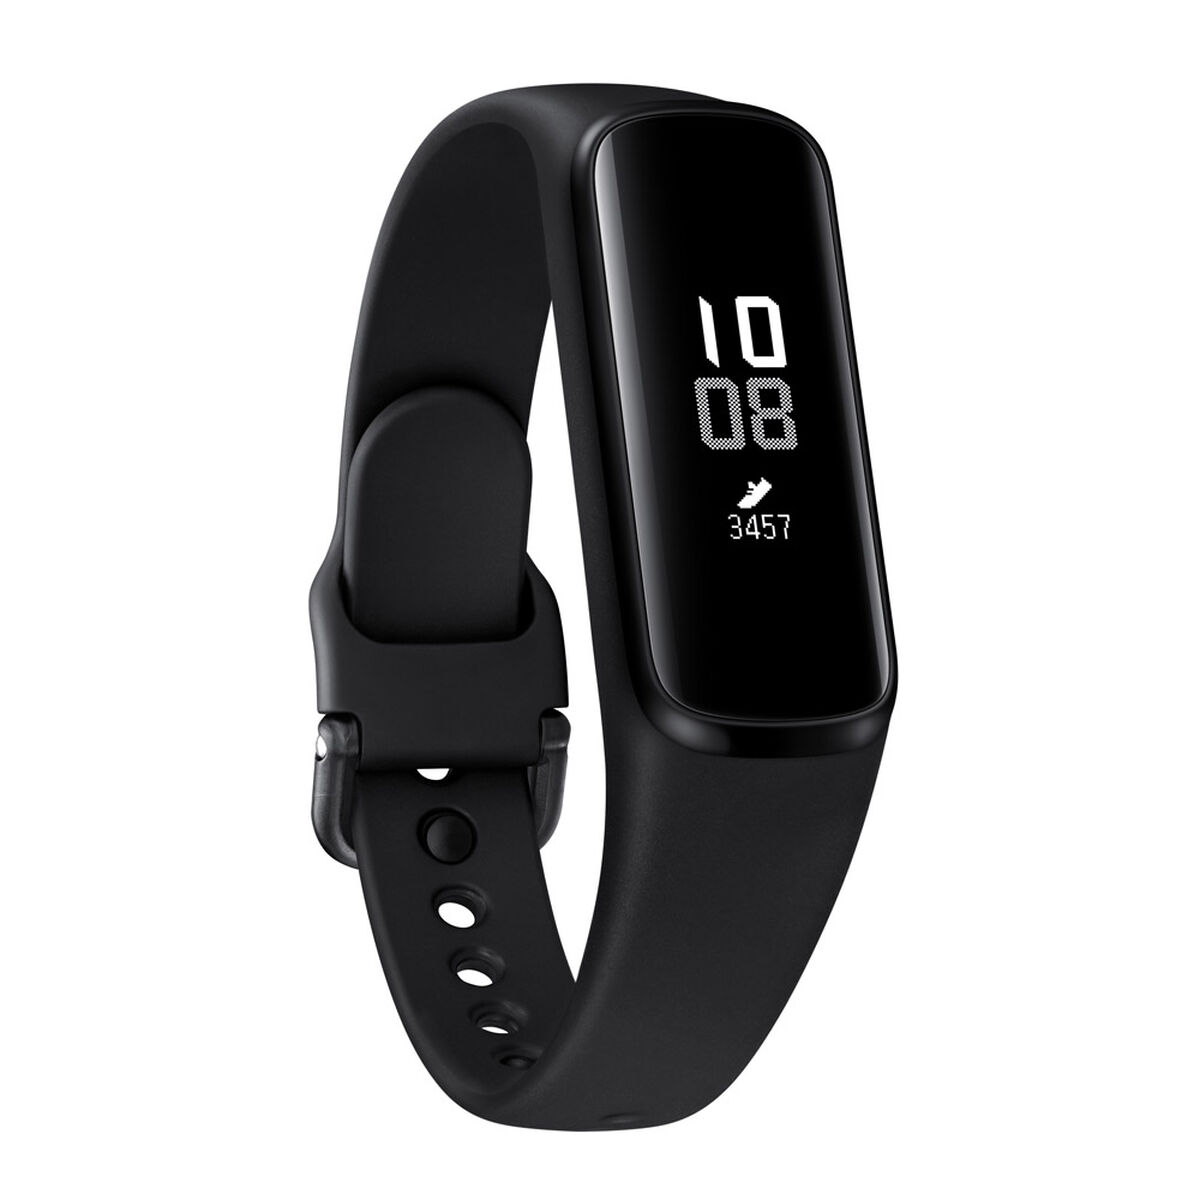 These are the Best nine Smart bands in India to Buy in 2022!